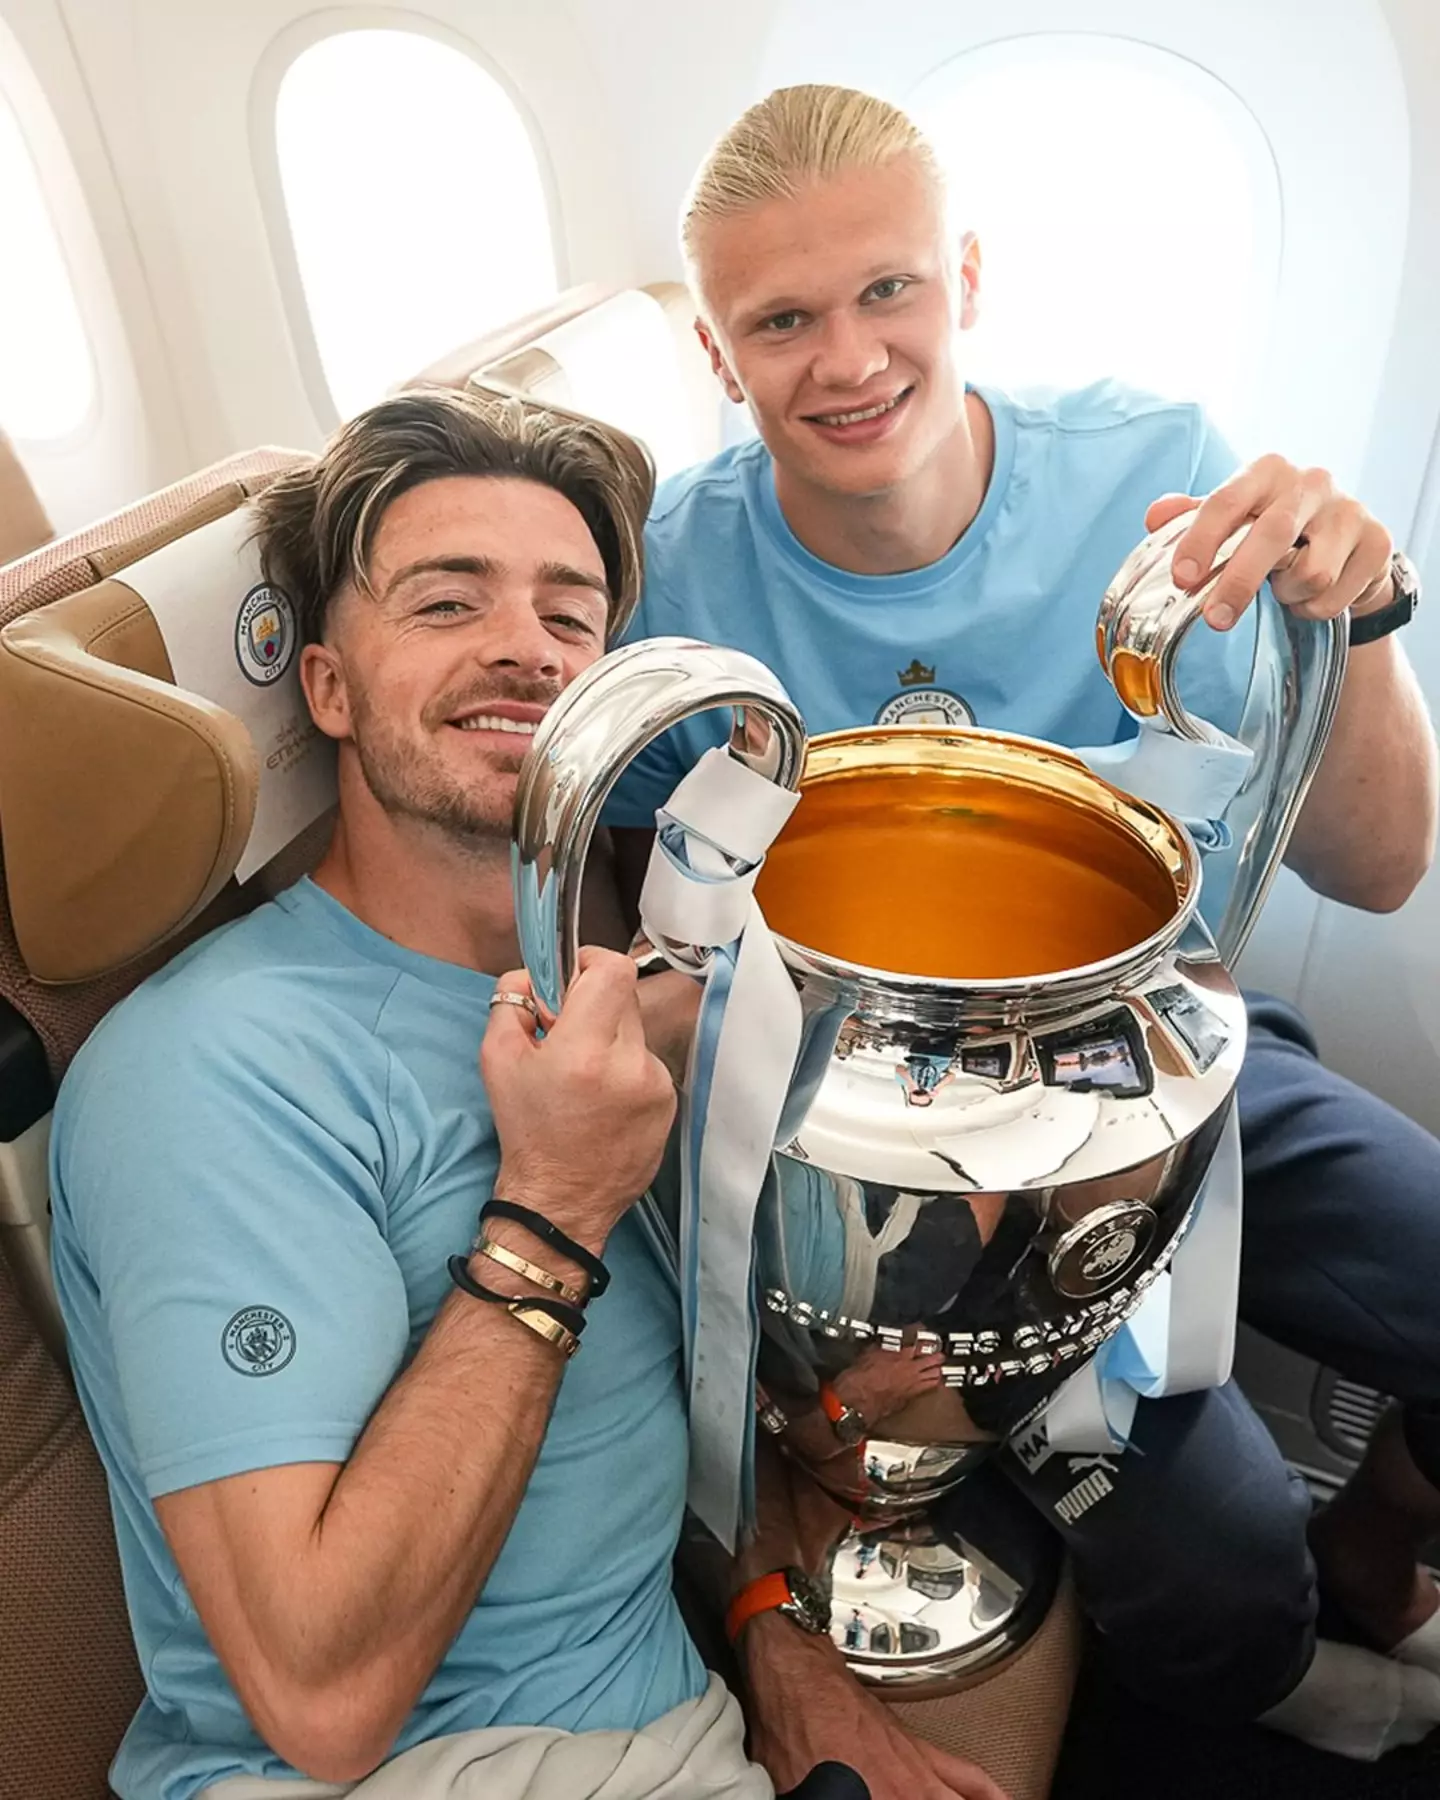 Man City stars Erling Haaland and Jack Grealish will be itching to get out there.